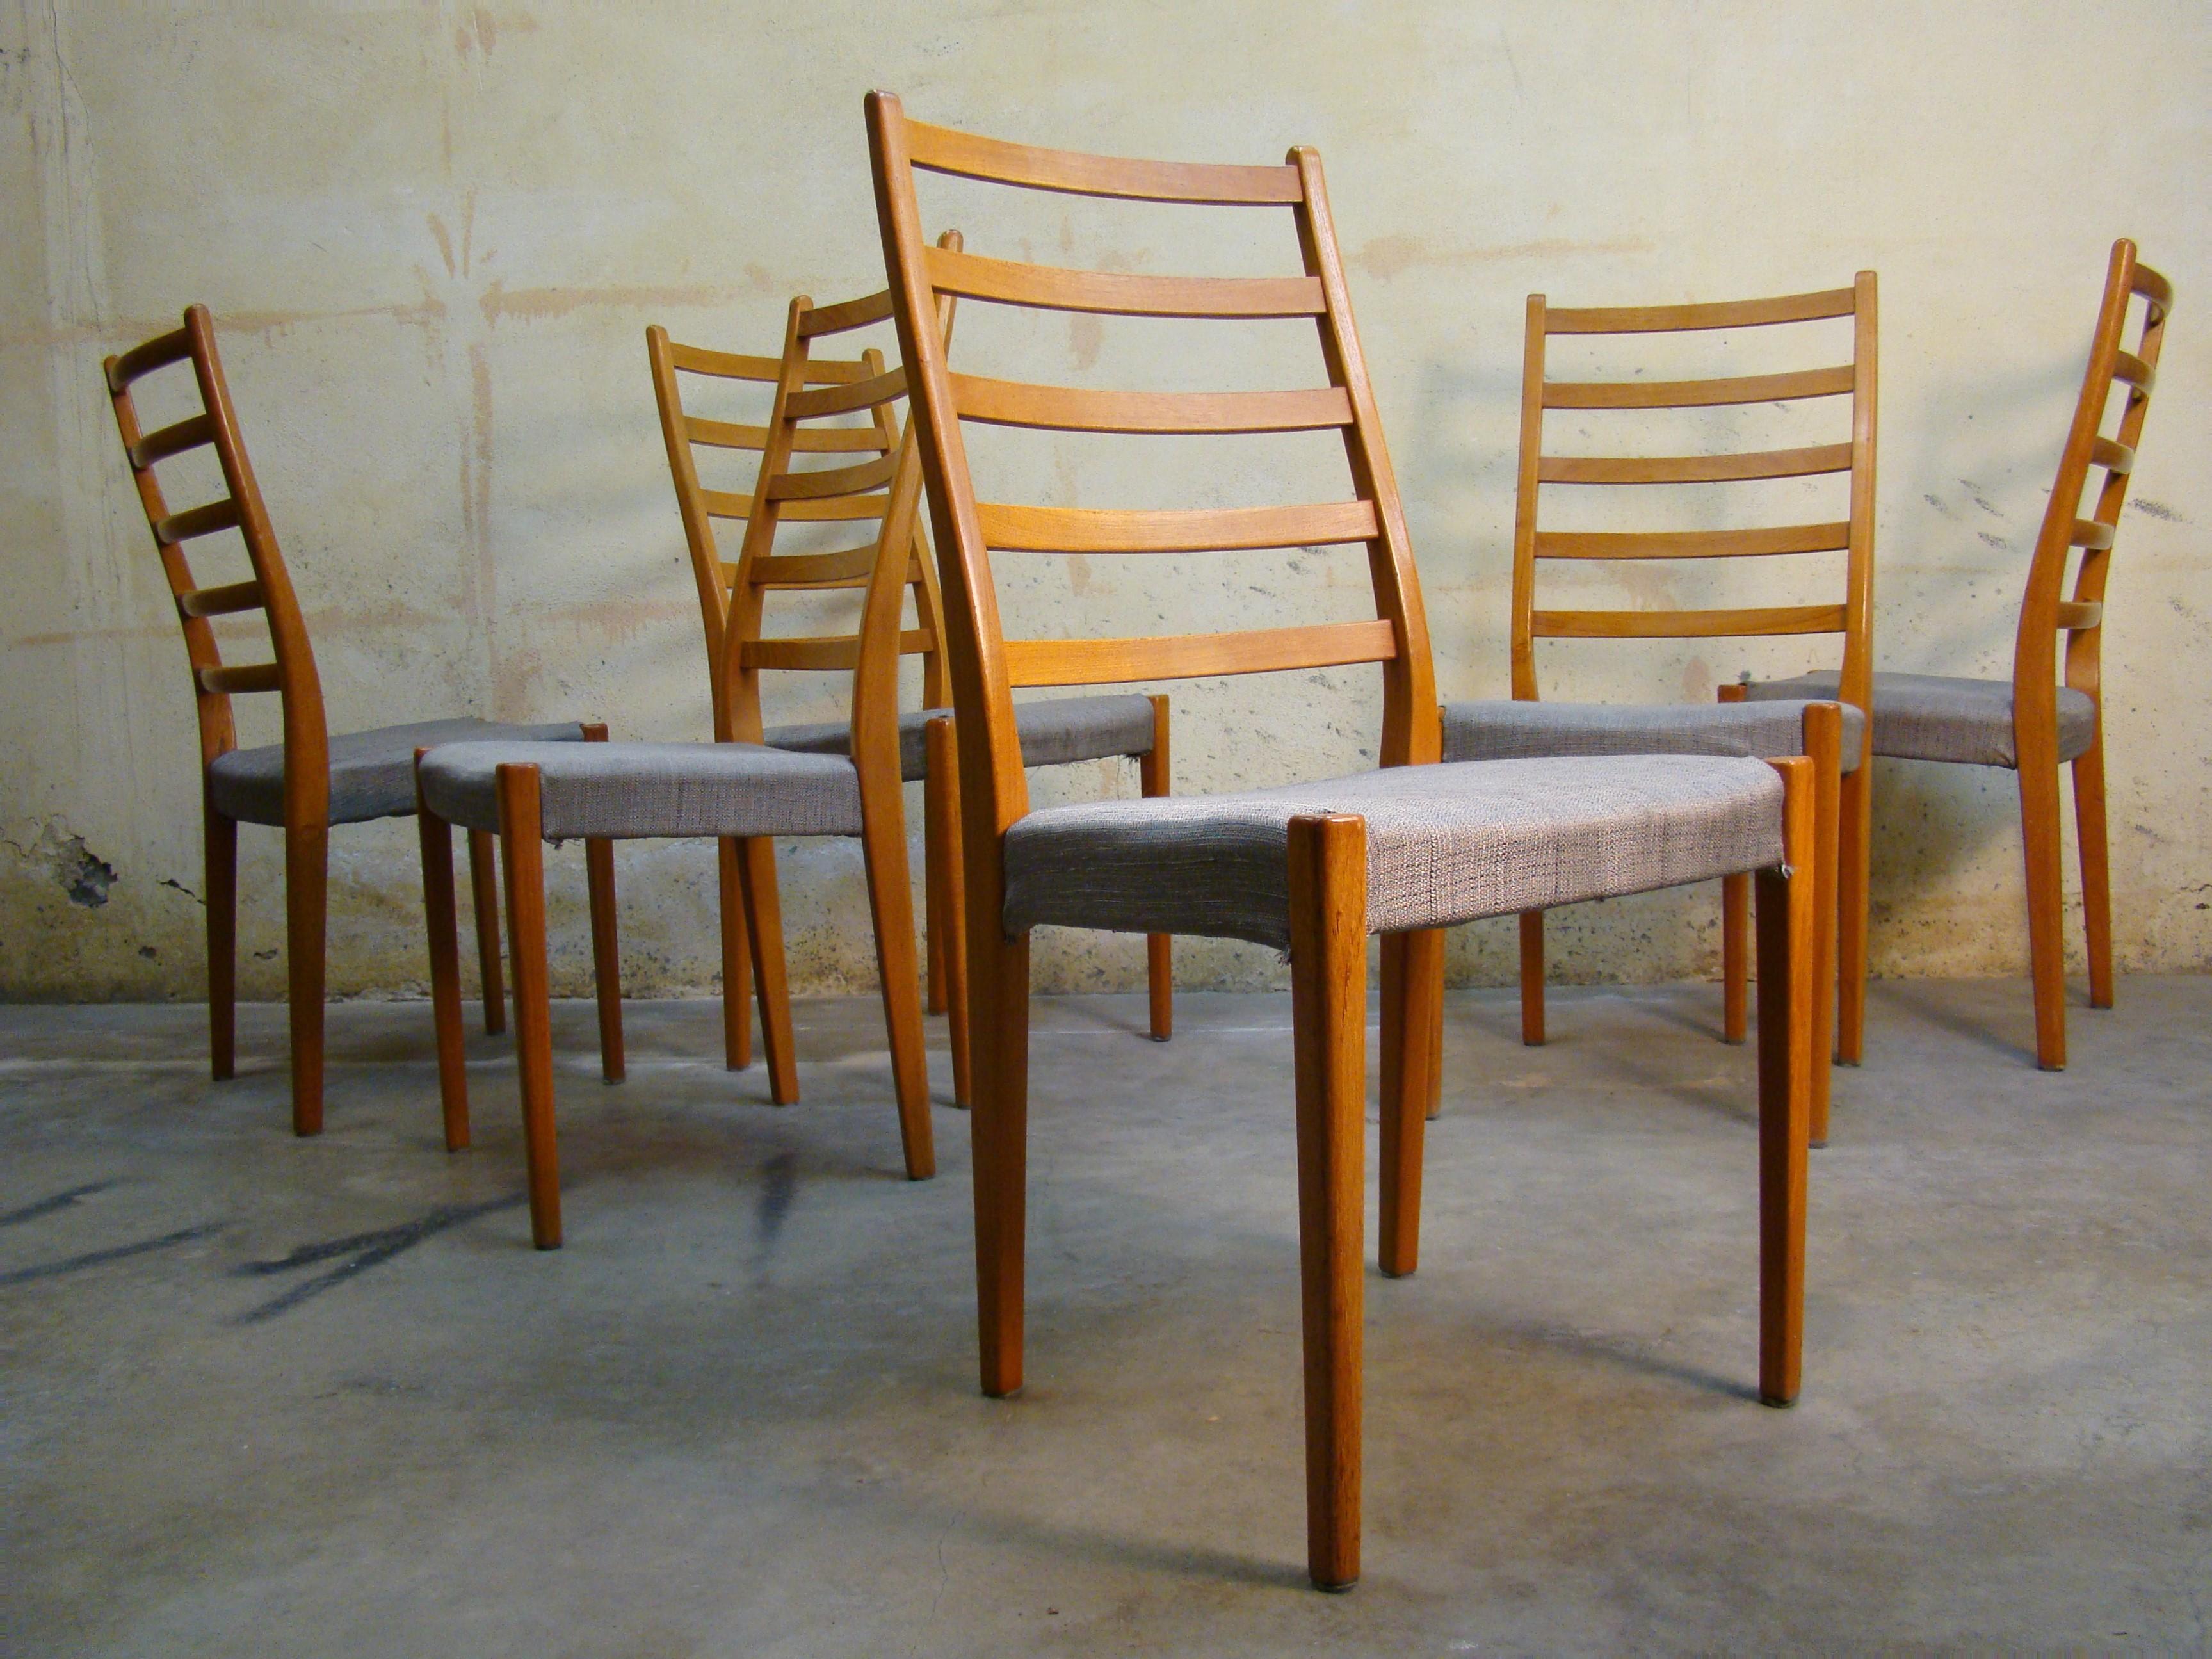 Set of six vintage teak dining side chairs by Svegards Markaryd Denmark solid wood frame, beautiful wood grain, clean modernist lines, quality craftsmanship, circa mid-20th century.